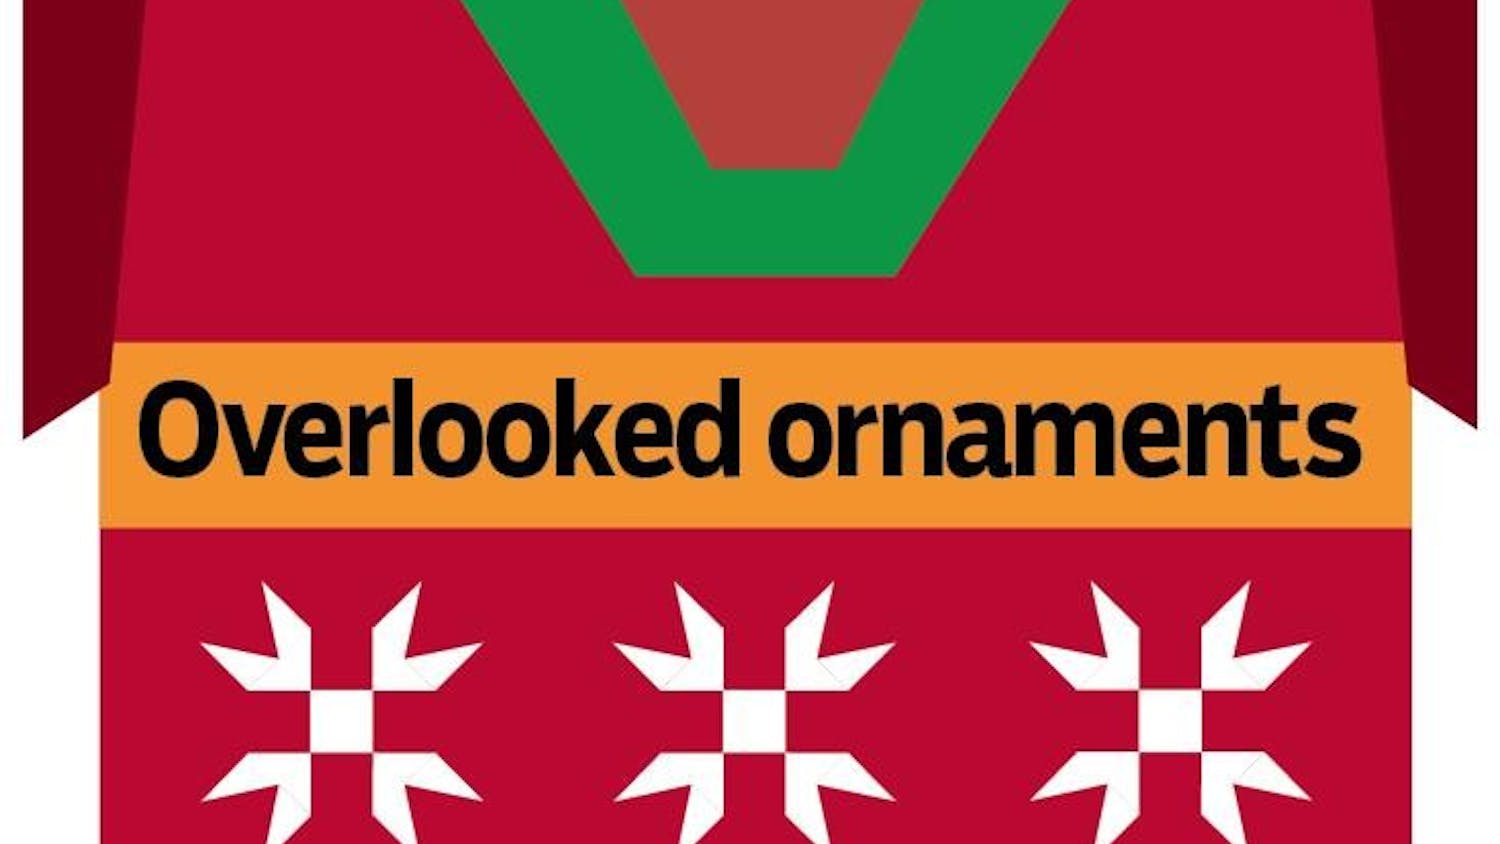 Overlooked ornaments